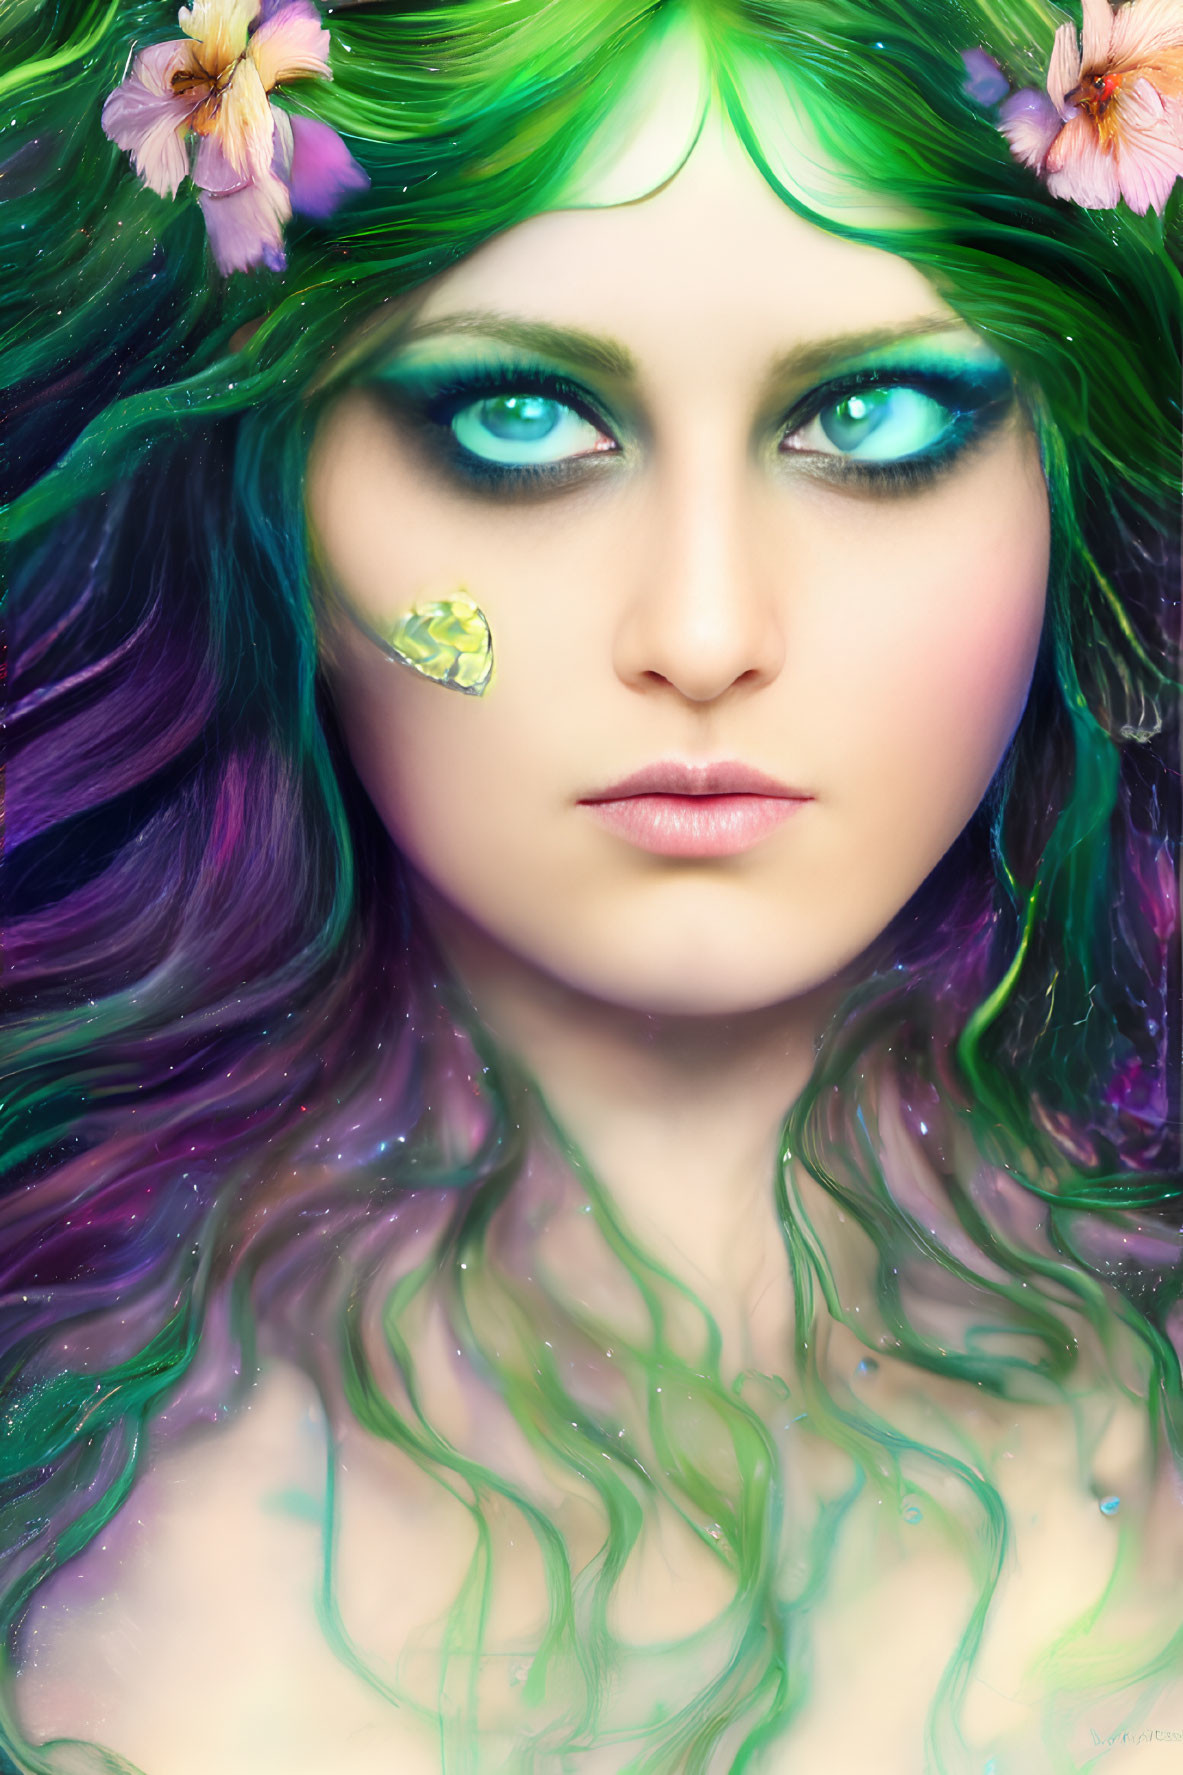 Colorful digital portrait of a woman with green eyes, multicolored hair, flowers, and a